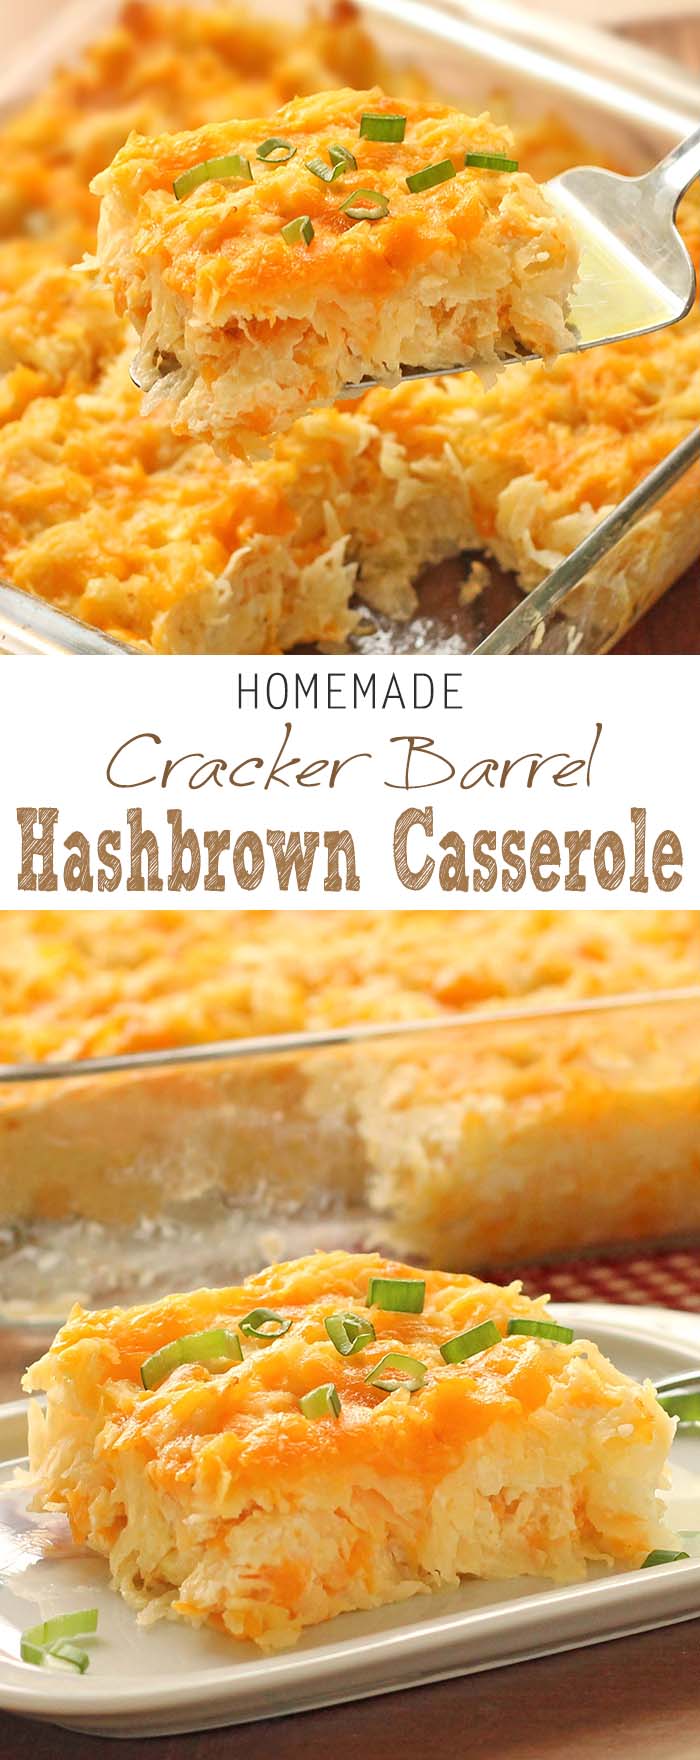  Homemade Cracker Barrel HashBrown Casserole is super easy to whip up, but grants you restaurant quality taste right in your own kitchen.